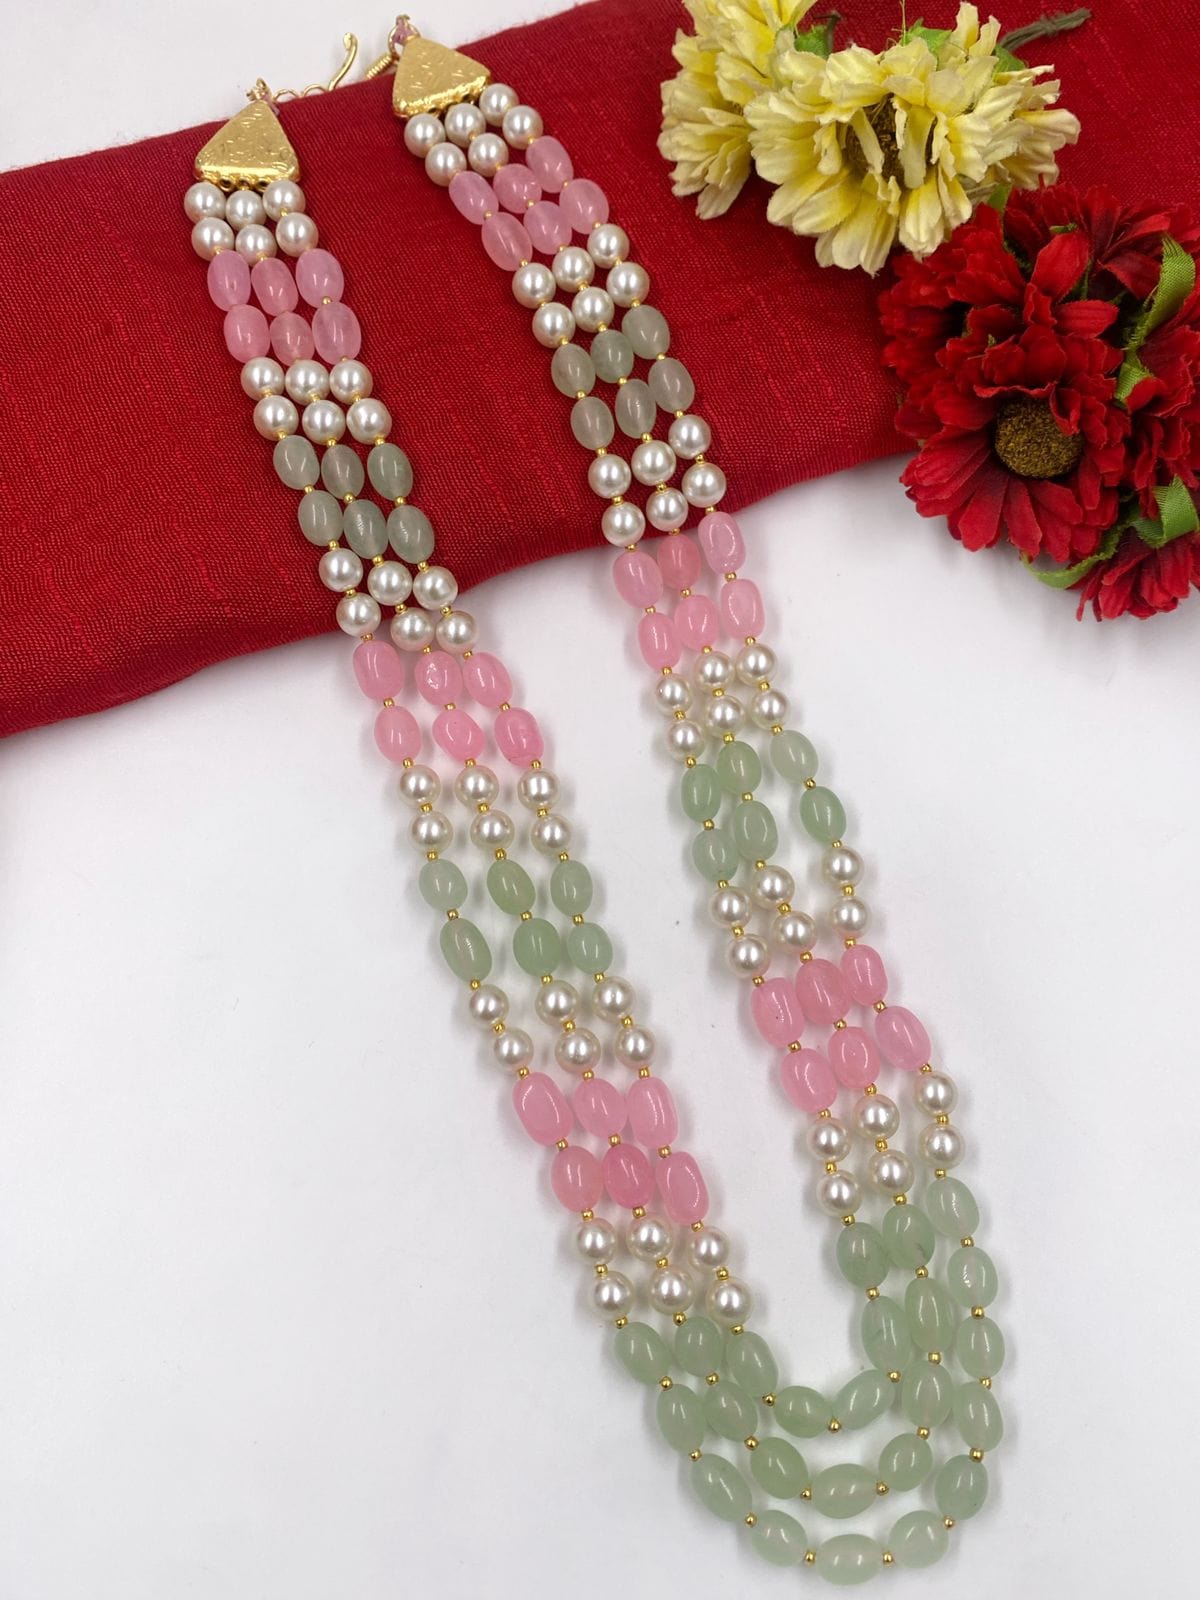 Triple Layered Semi Precious Jade Beads Necklace For Men And Women By Gehna Shop Beads Jewellery